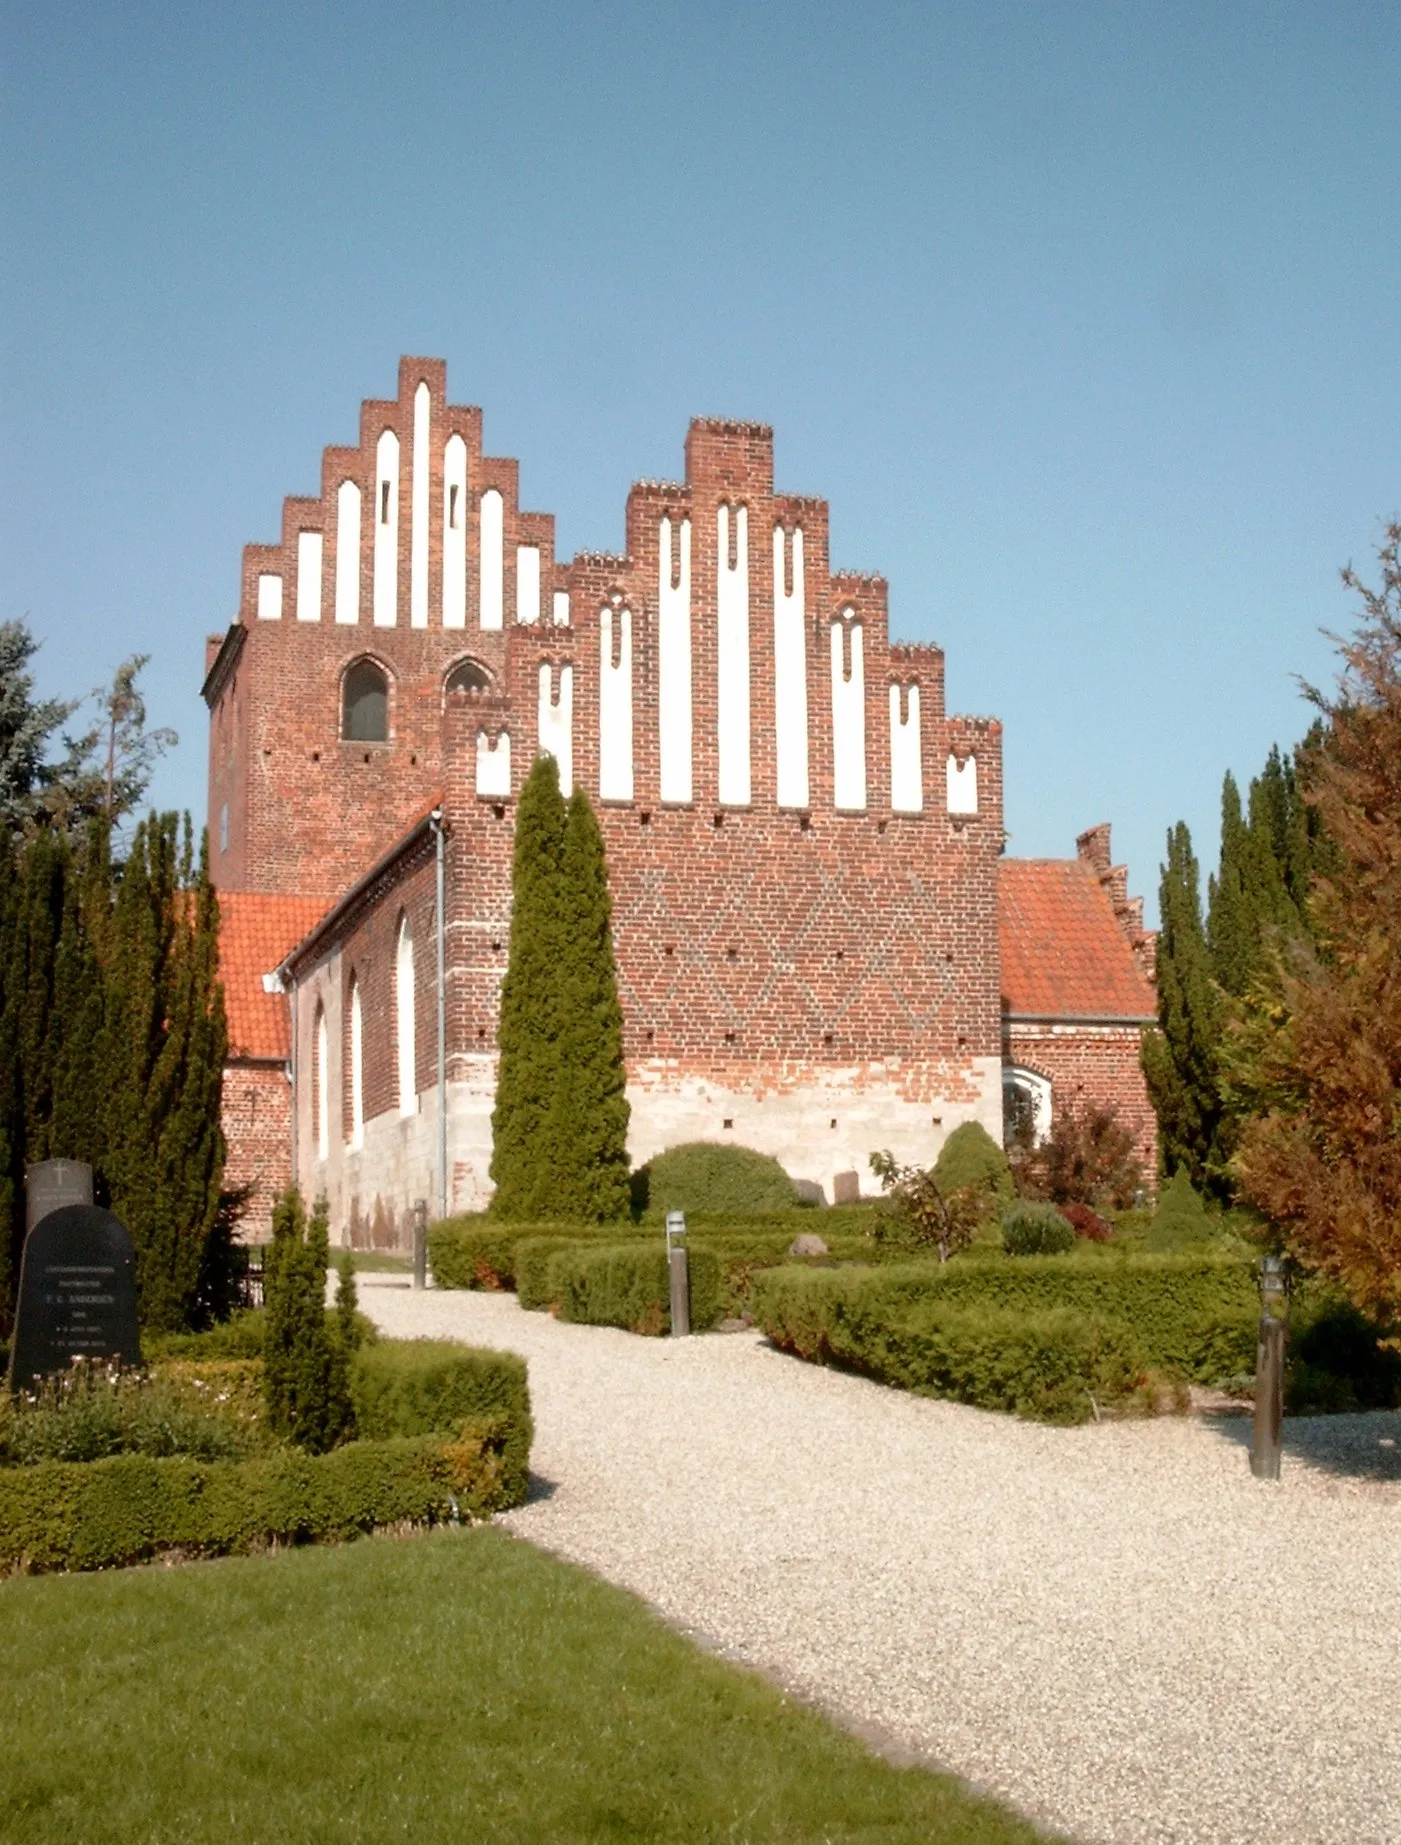 Photo showing: A view of Høje Taastrup Church from the east.  Høje Taastrup, Denmark.  Photographer: Dan

Simon